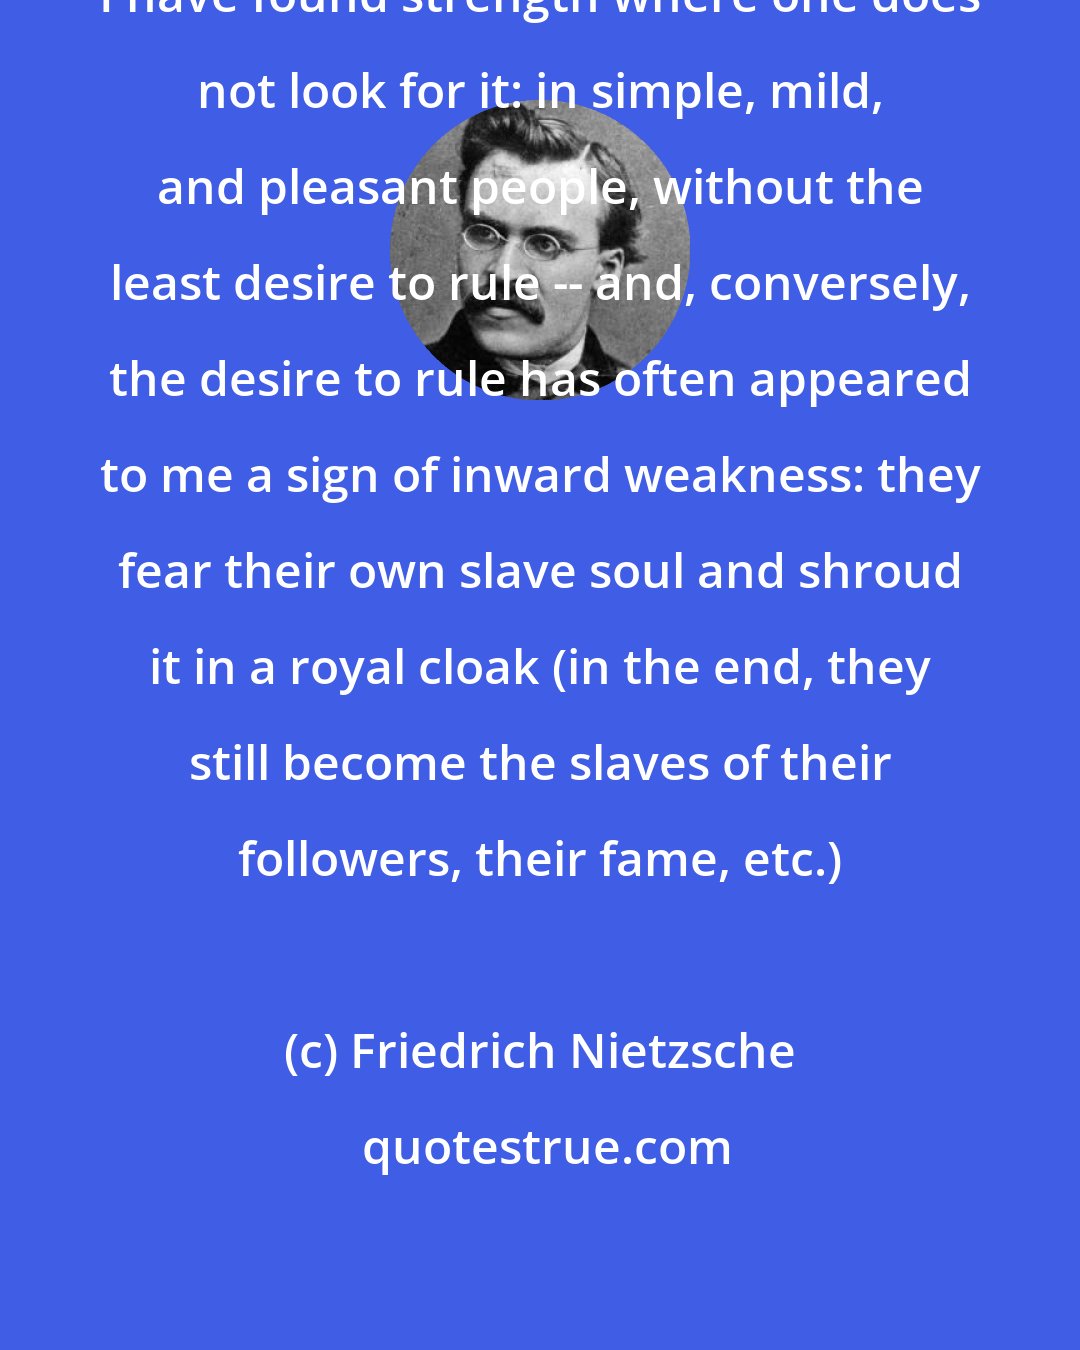 Friedrich Nietzsche: I have found strength where one does not look for it: in simple, mild, and pleasant people, without the least desire to rule -- and, conversely, the desire to rule has often appeared to me a sign of inward weakness: they fear their own slave soul and shroud it in a royal cloak (in the end, they still become the slaves of their followers, their fame, etc.)